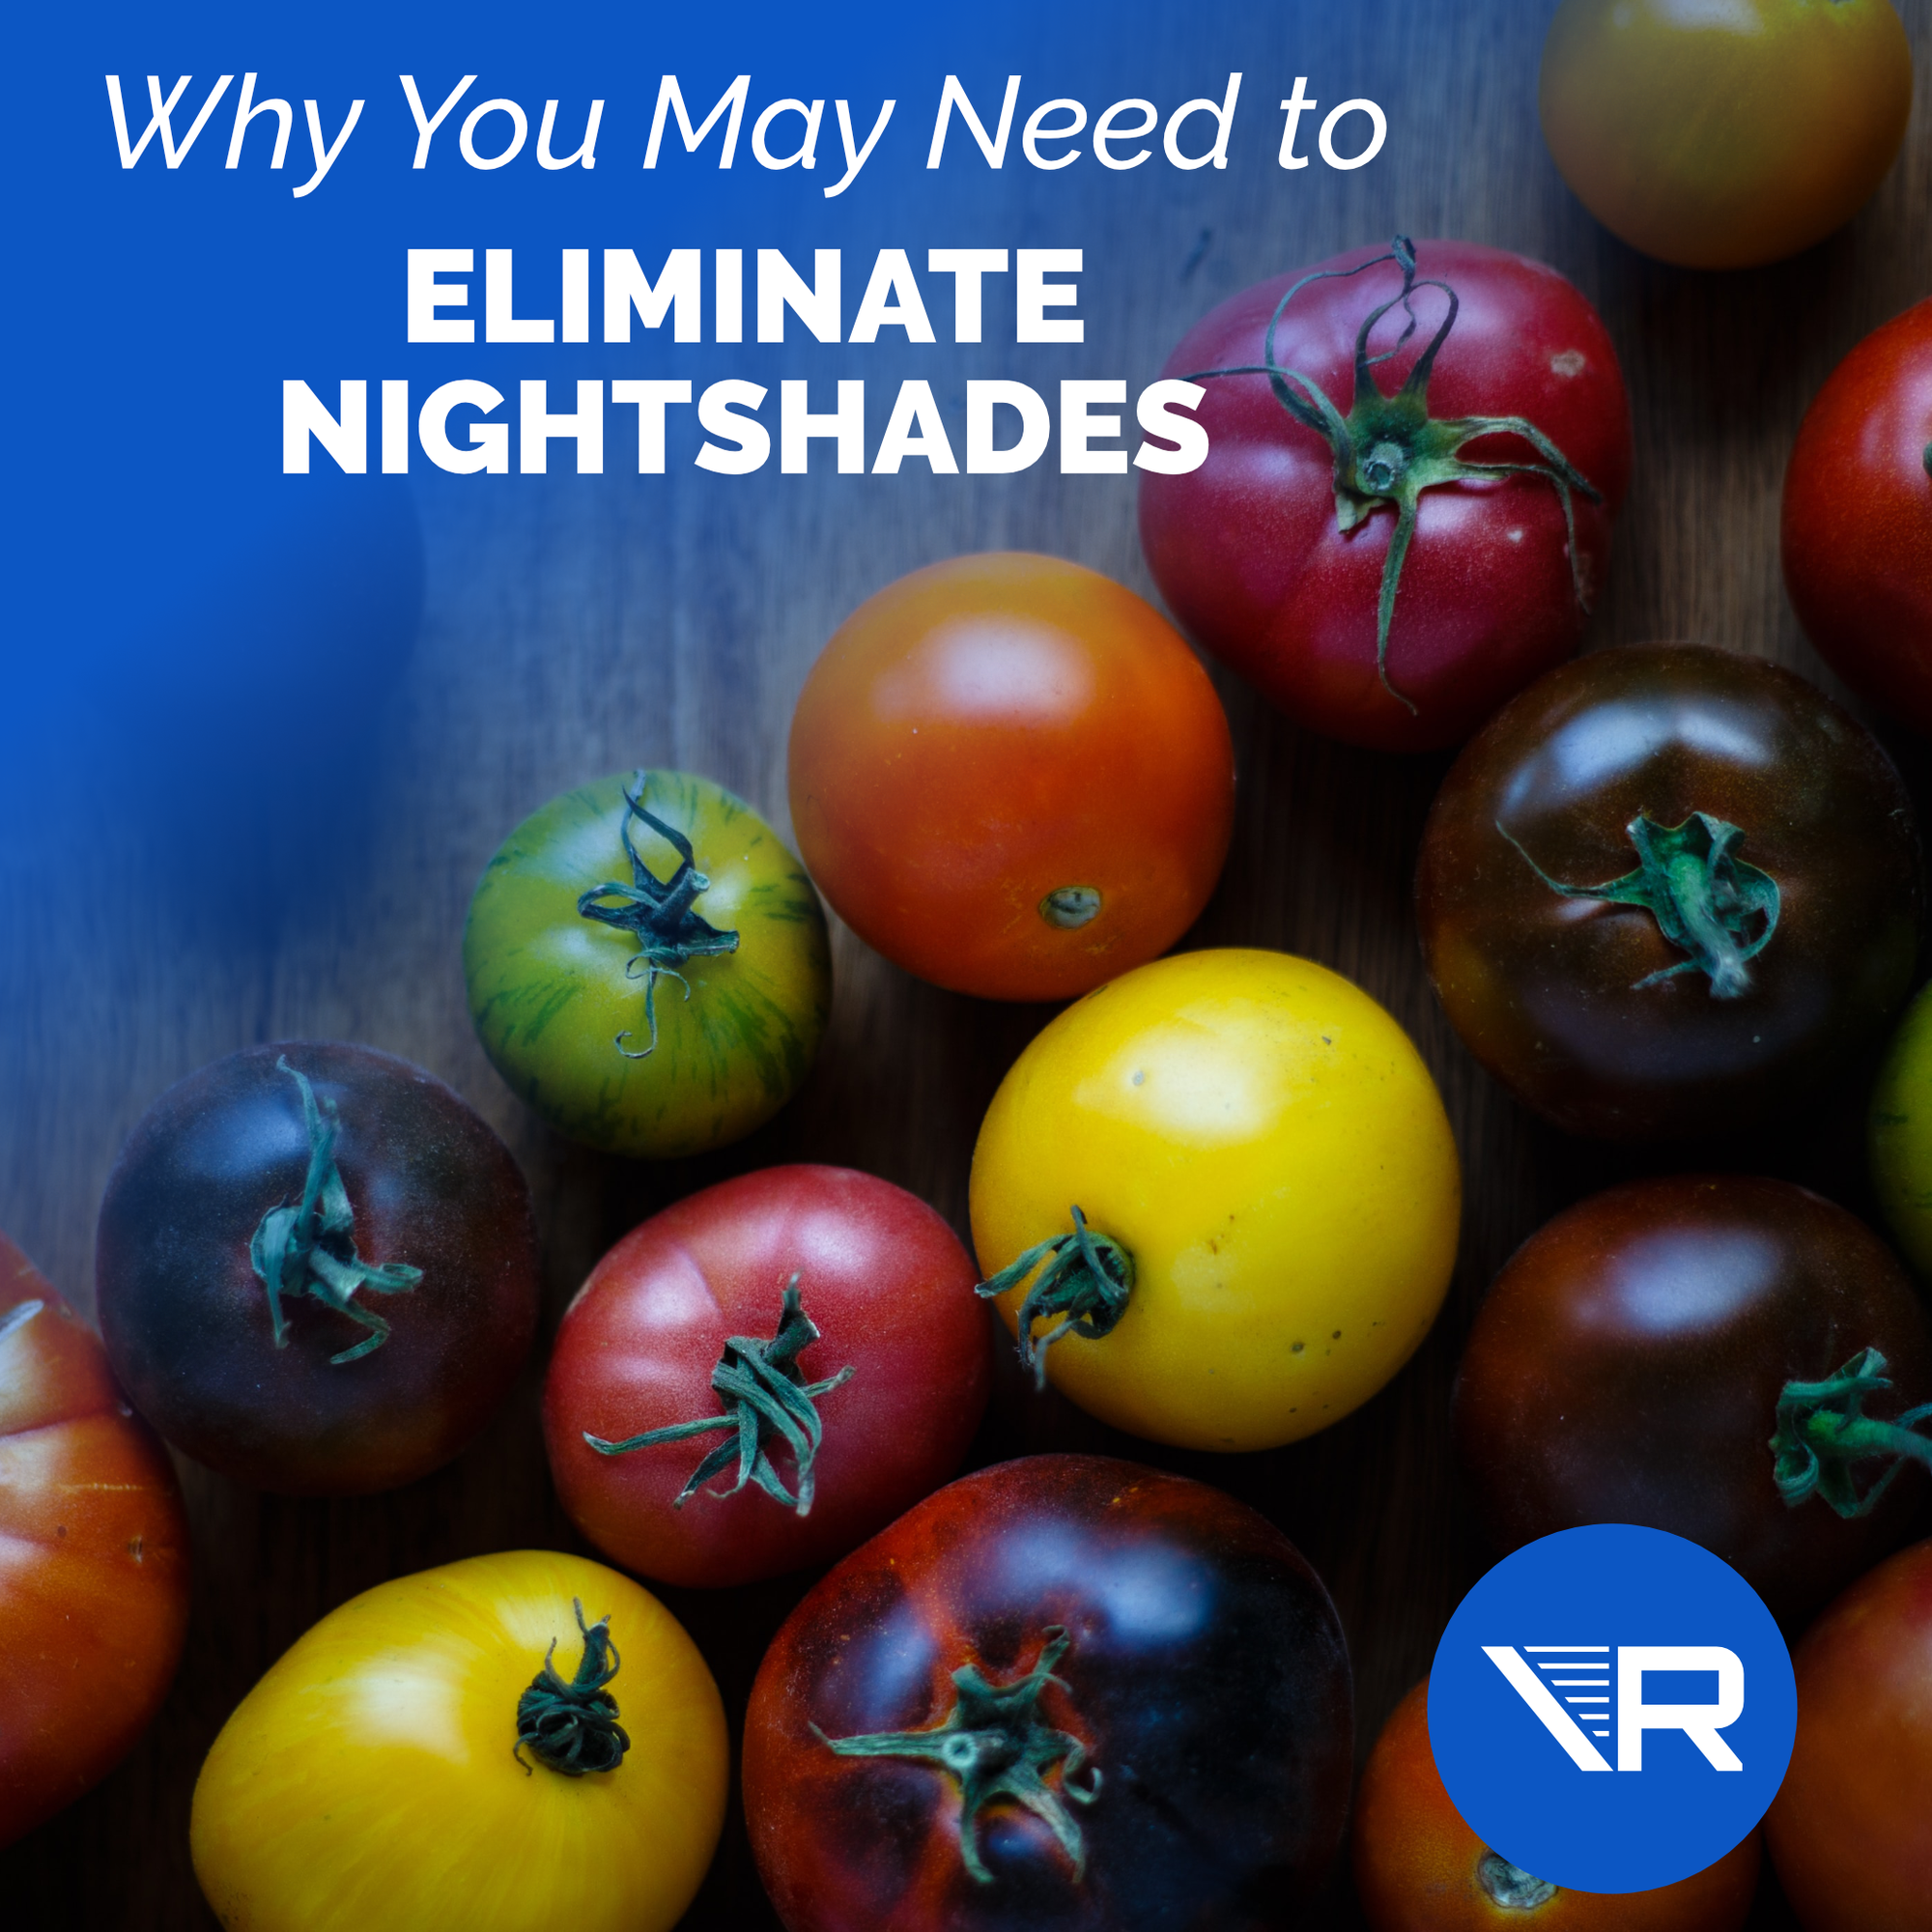 Are Tomatoes Bad for You? 4 Reasons to Eliminate Nightshades